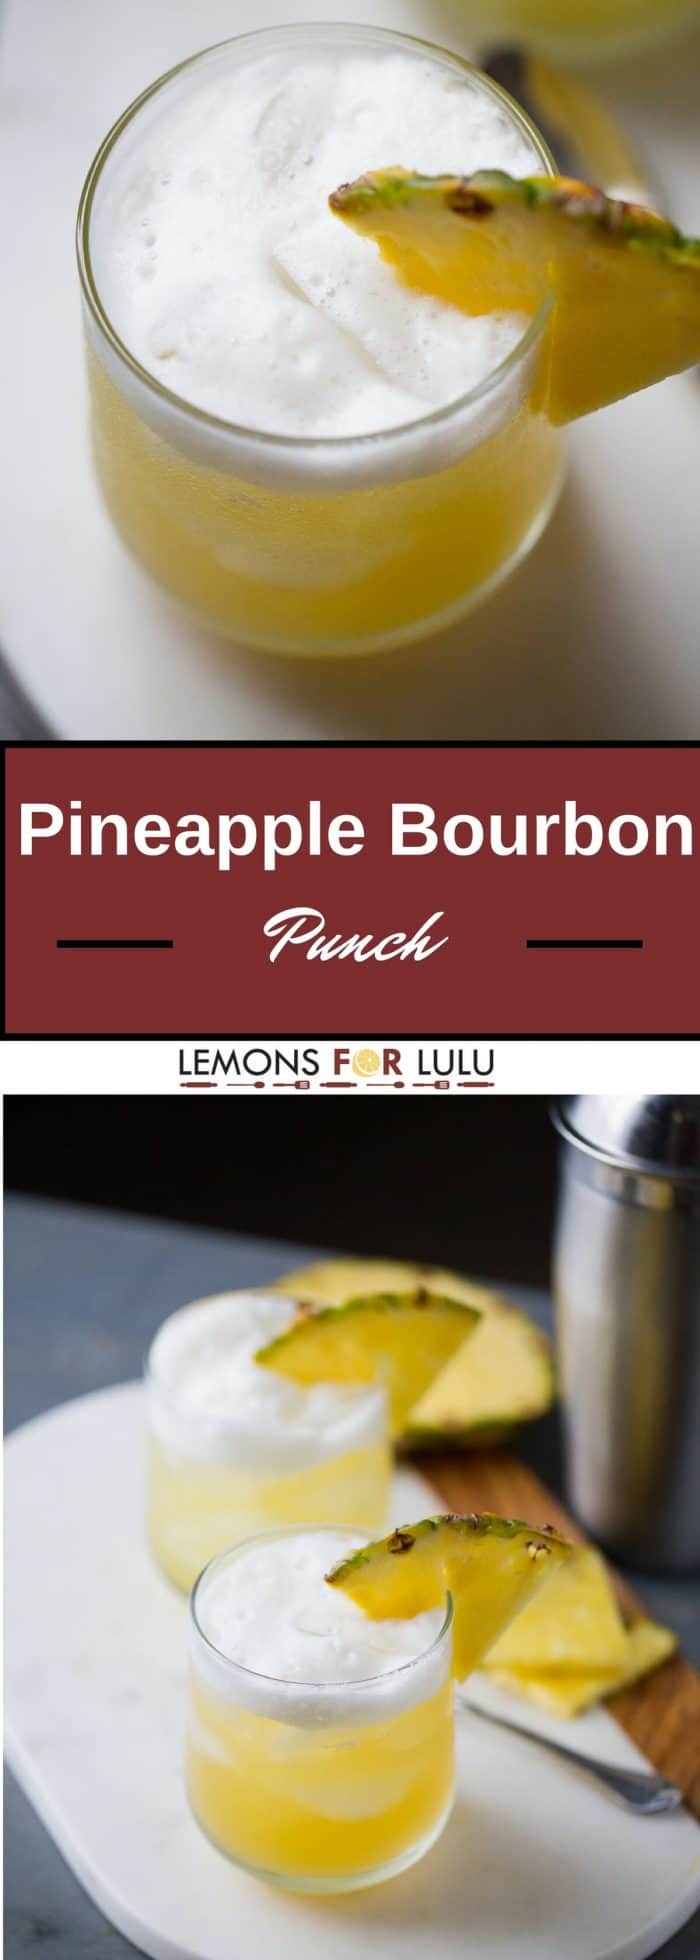 Pineapple Bourbon Punch - Bourbon, sweet pineapple juice, and hazelnut liqueur are shaken together for a tropical tasting drink.